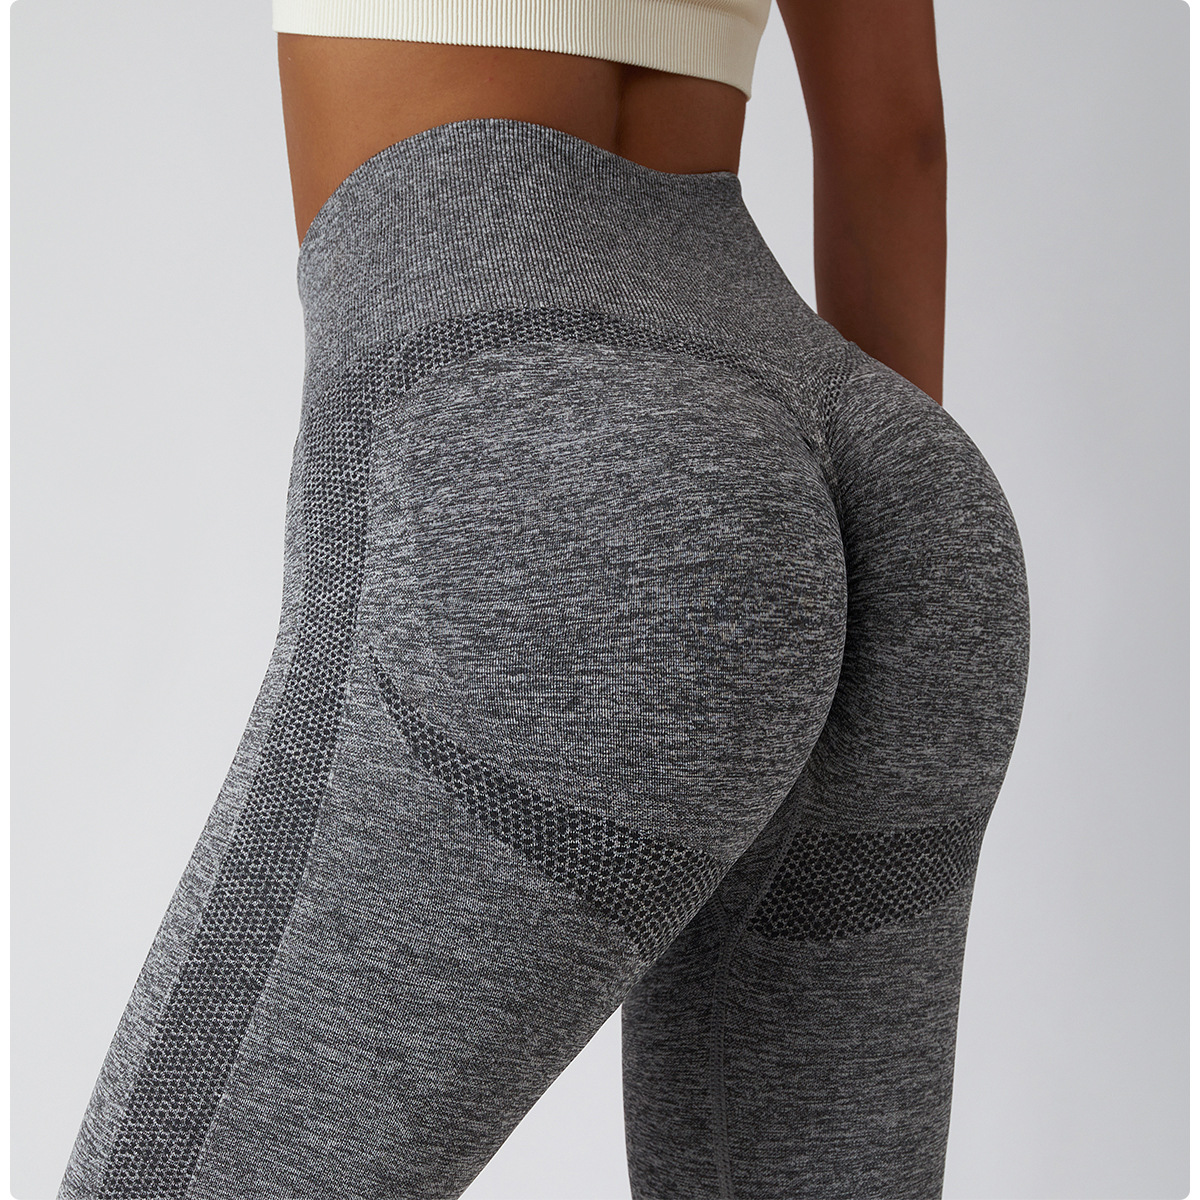 New Outdoor Running High Waist Leggings Seamless Knit Tight Breathable Yoga Pants